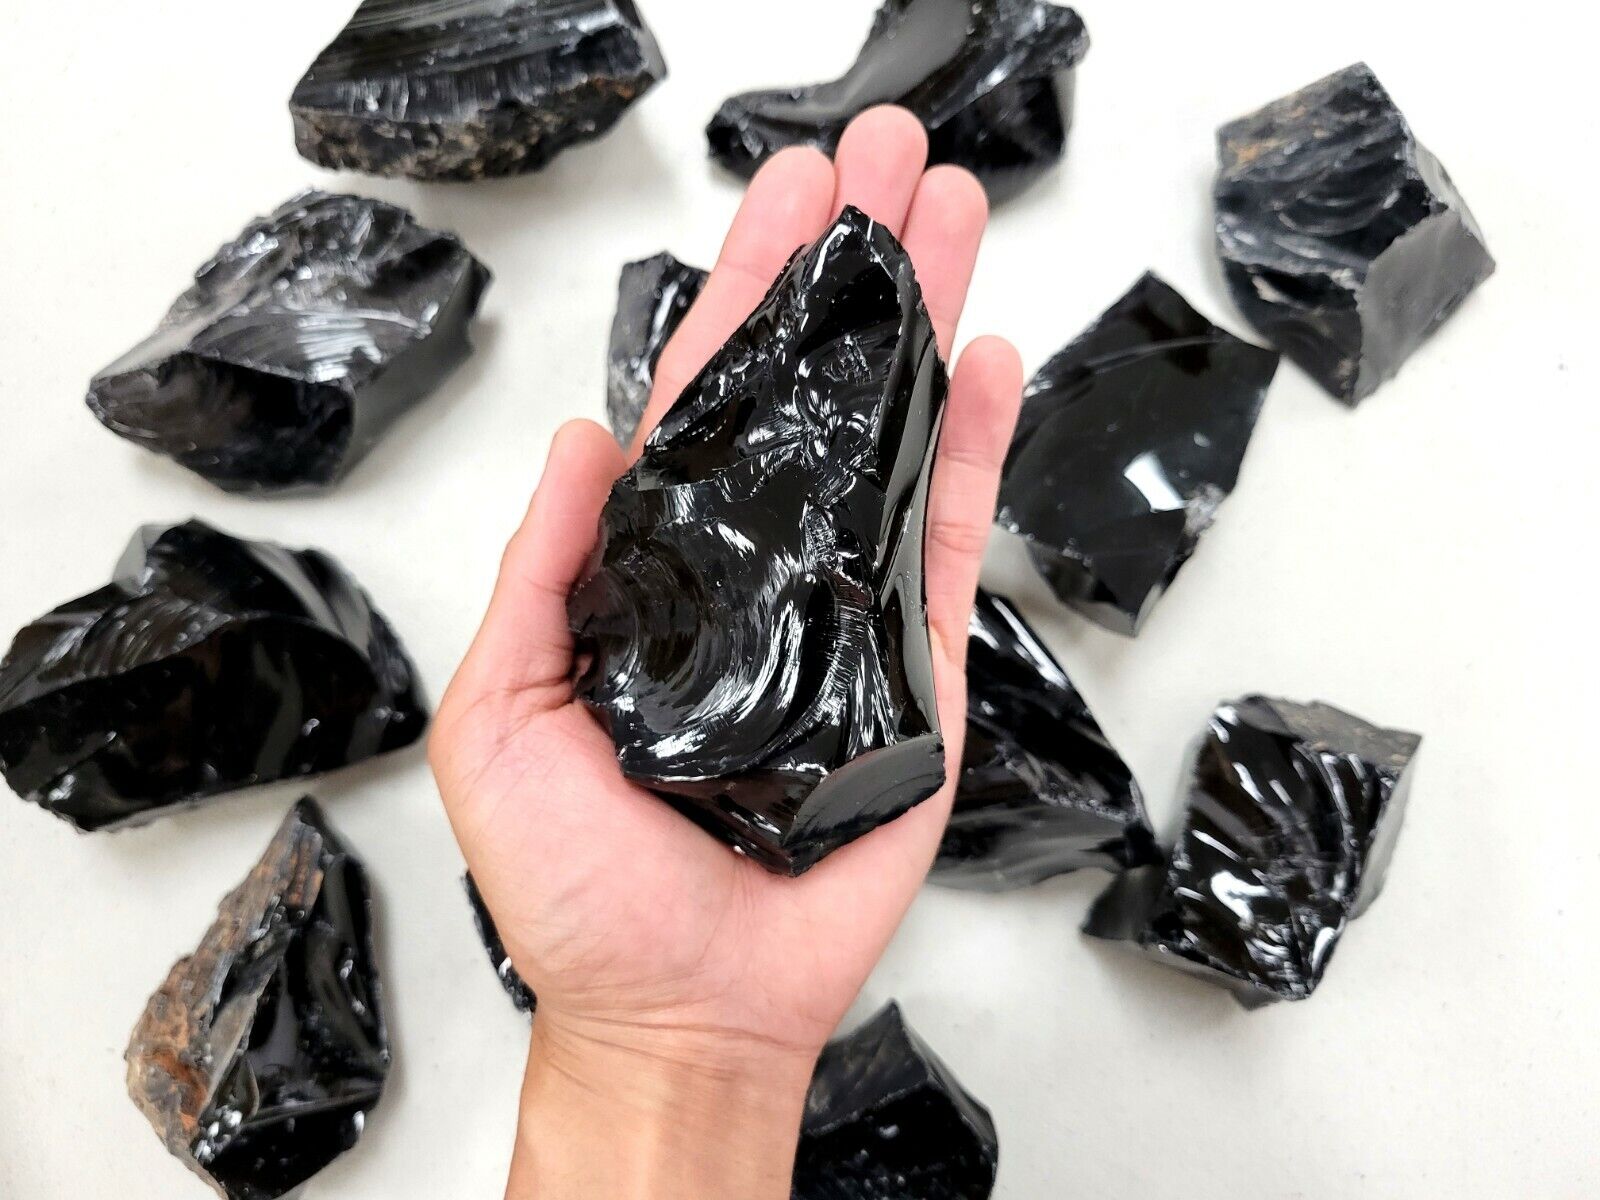 Large Raw Black Obsidian Stones Rough Natural Crystals for Lapidary & Healing